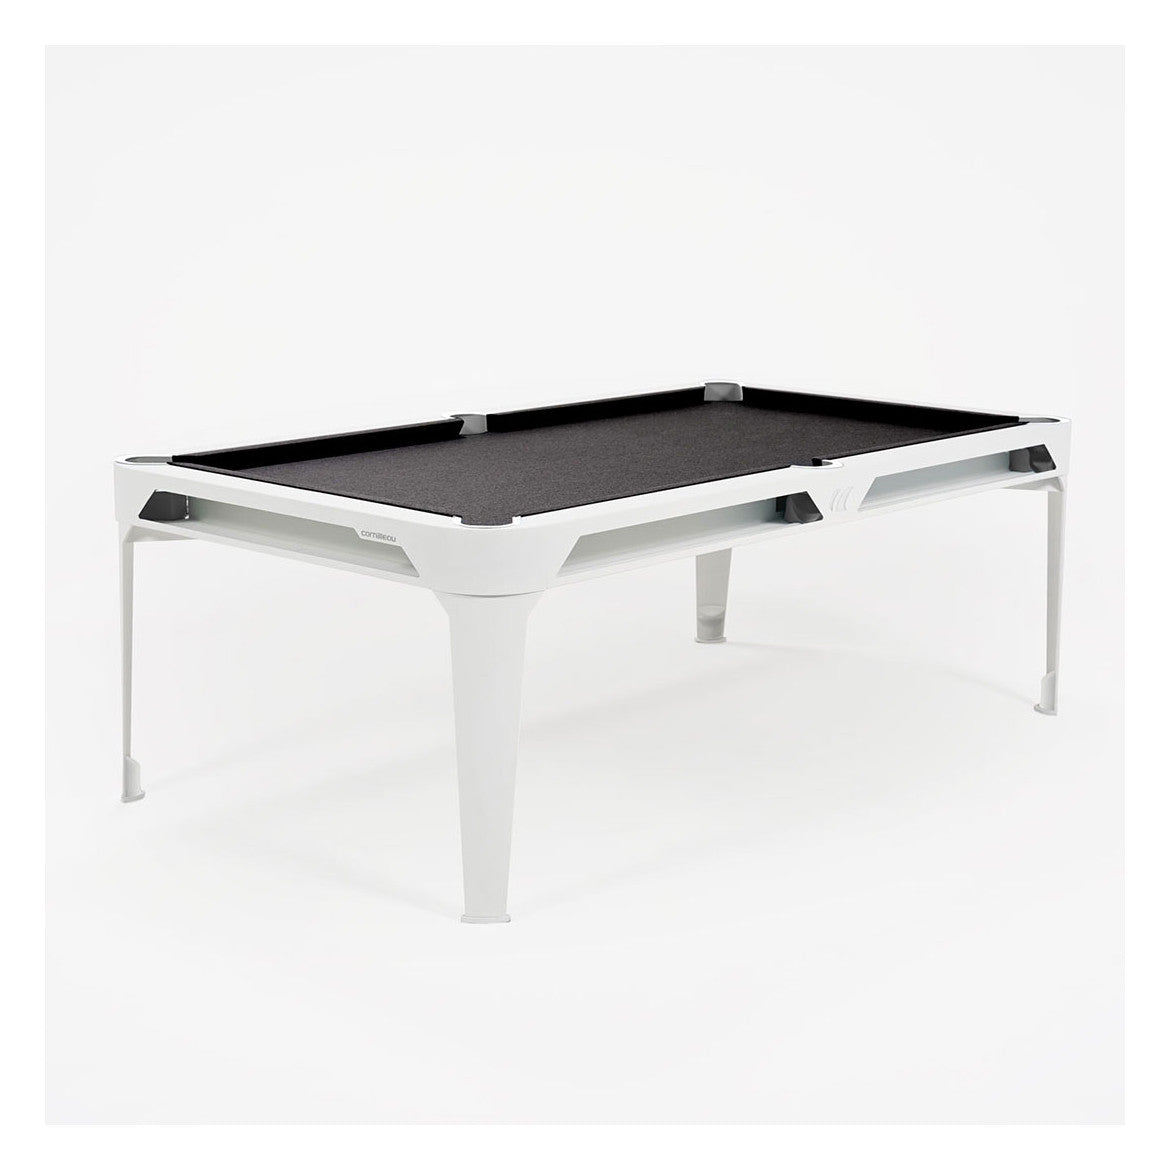 Hyphen Outdoor pool table by Cornilleau